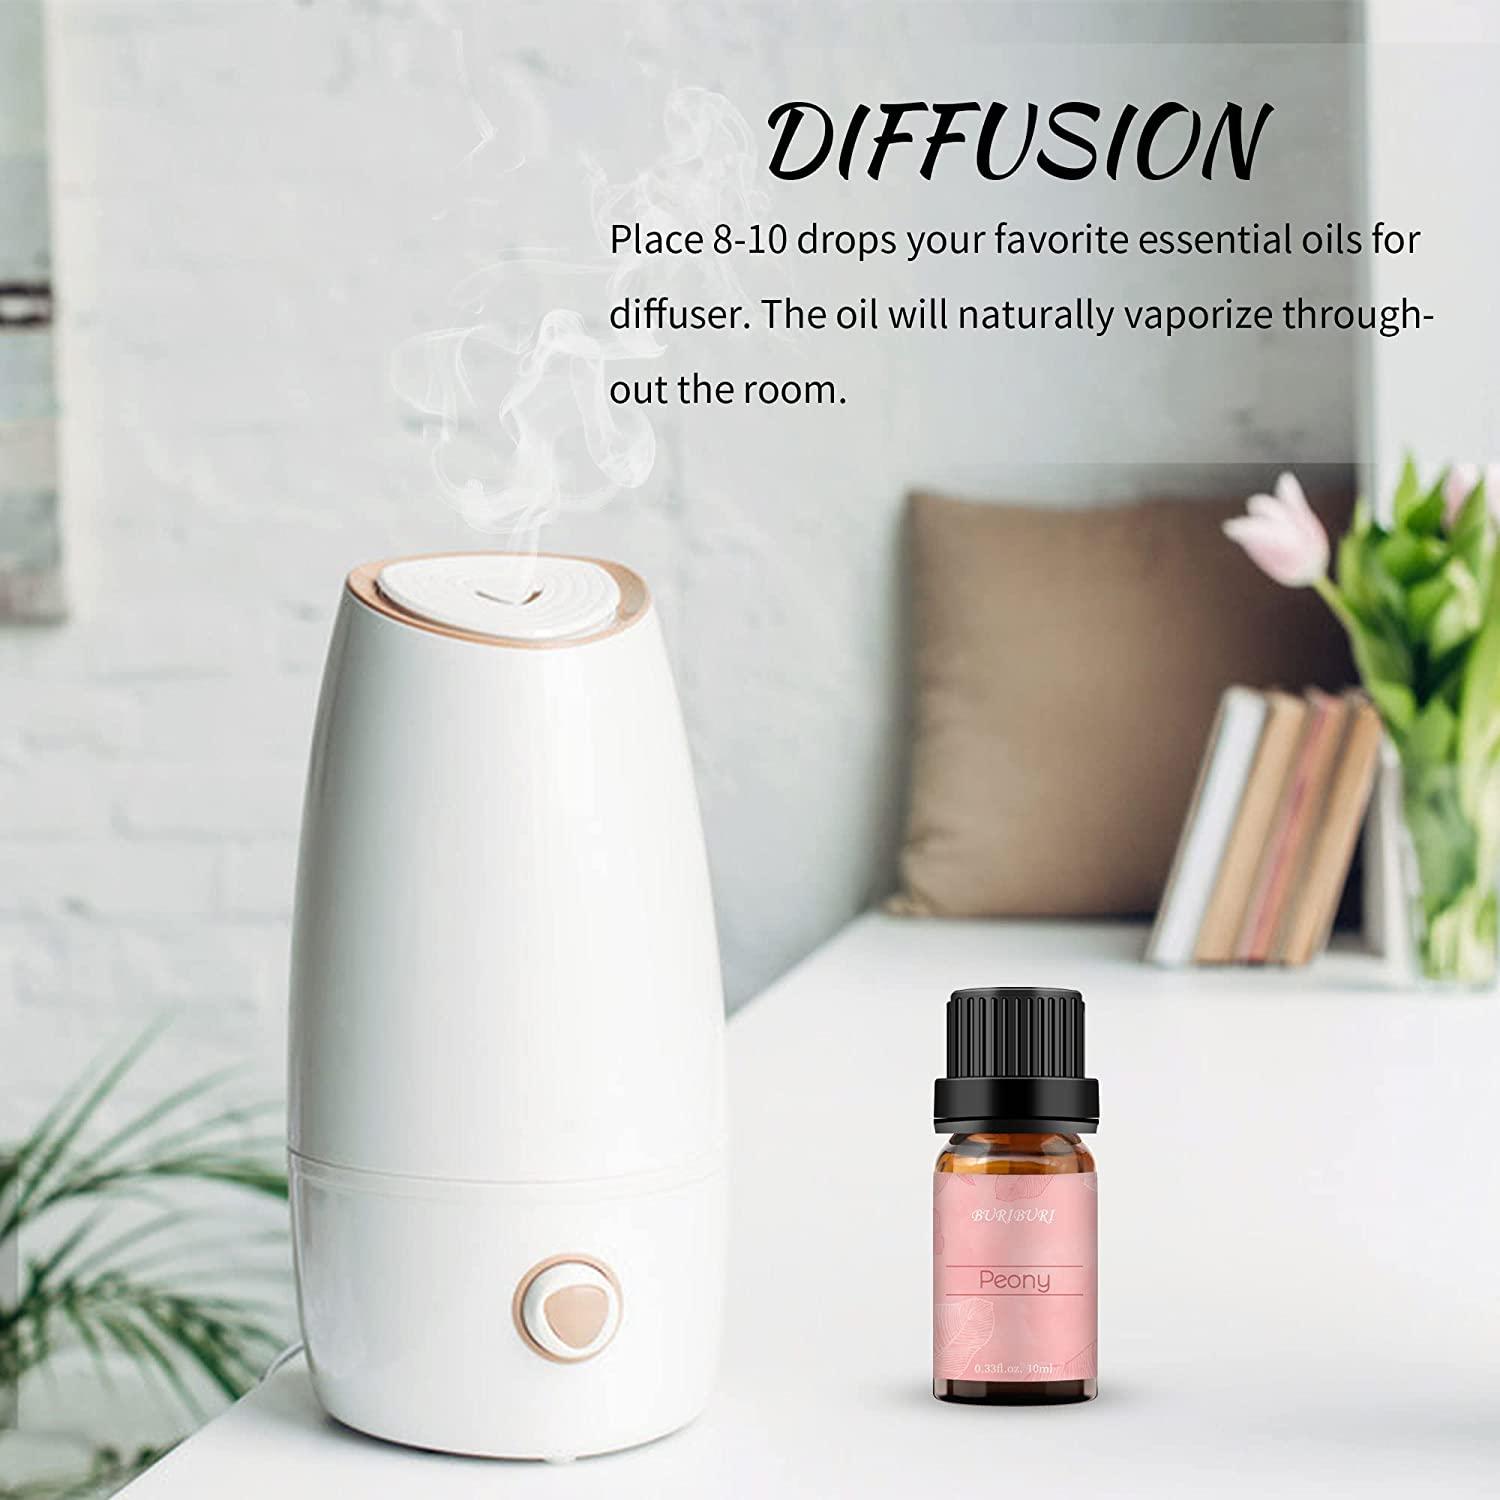 BURIBURI Peony Essential Oils, 100% Pure, Undiluted, Natural Aromatherapy  Peony Oil for Diffuser